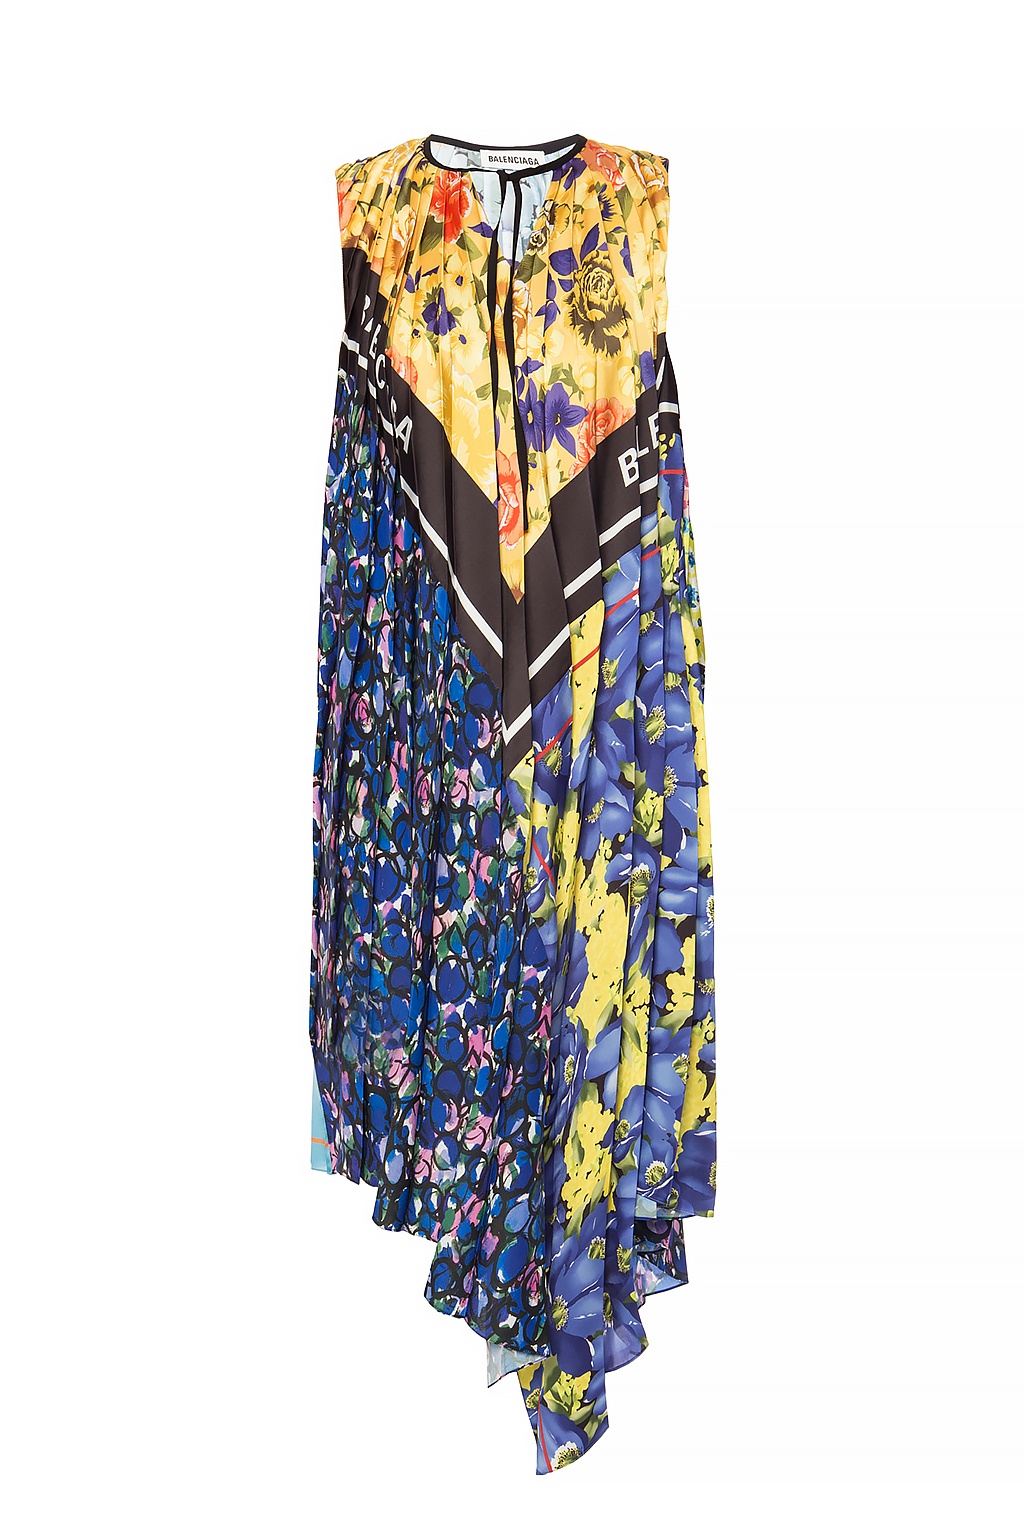 Balenciaga Floral-printed pleated dress, Women's Clothing